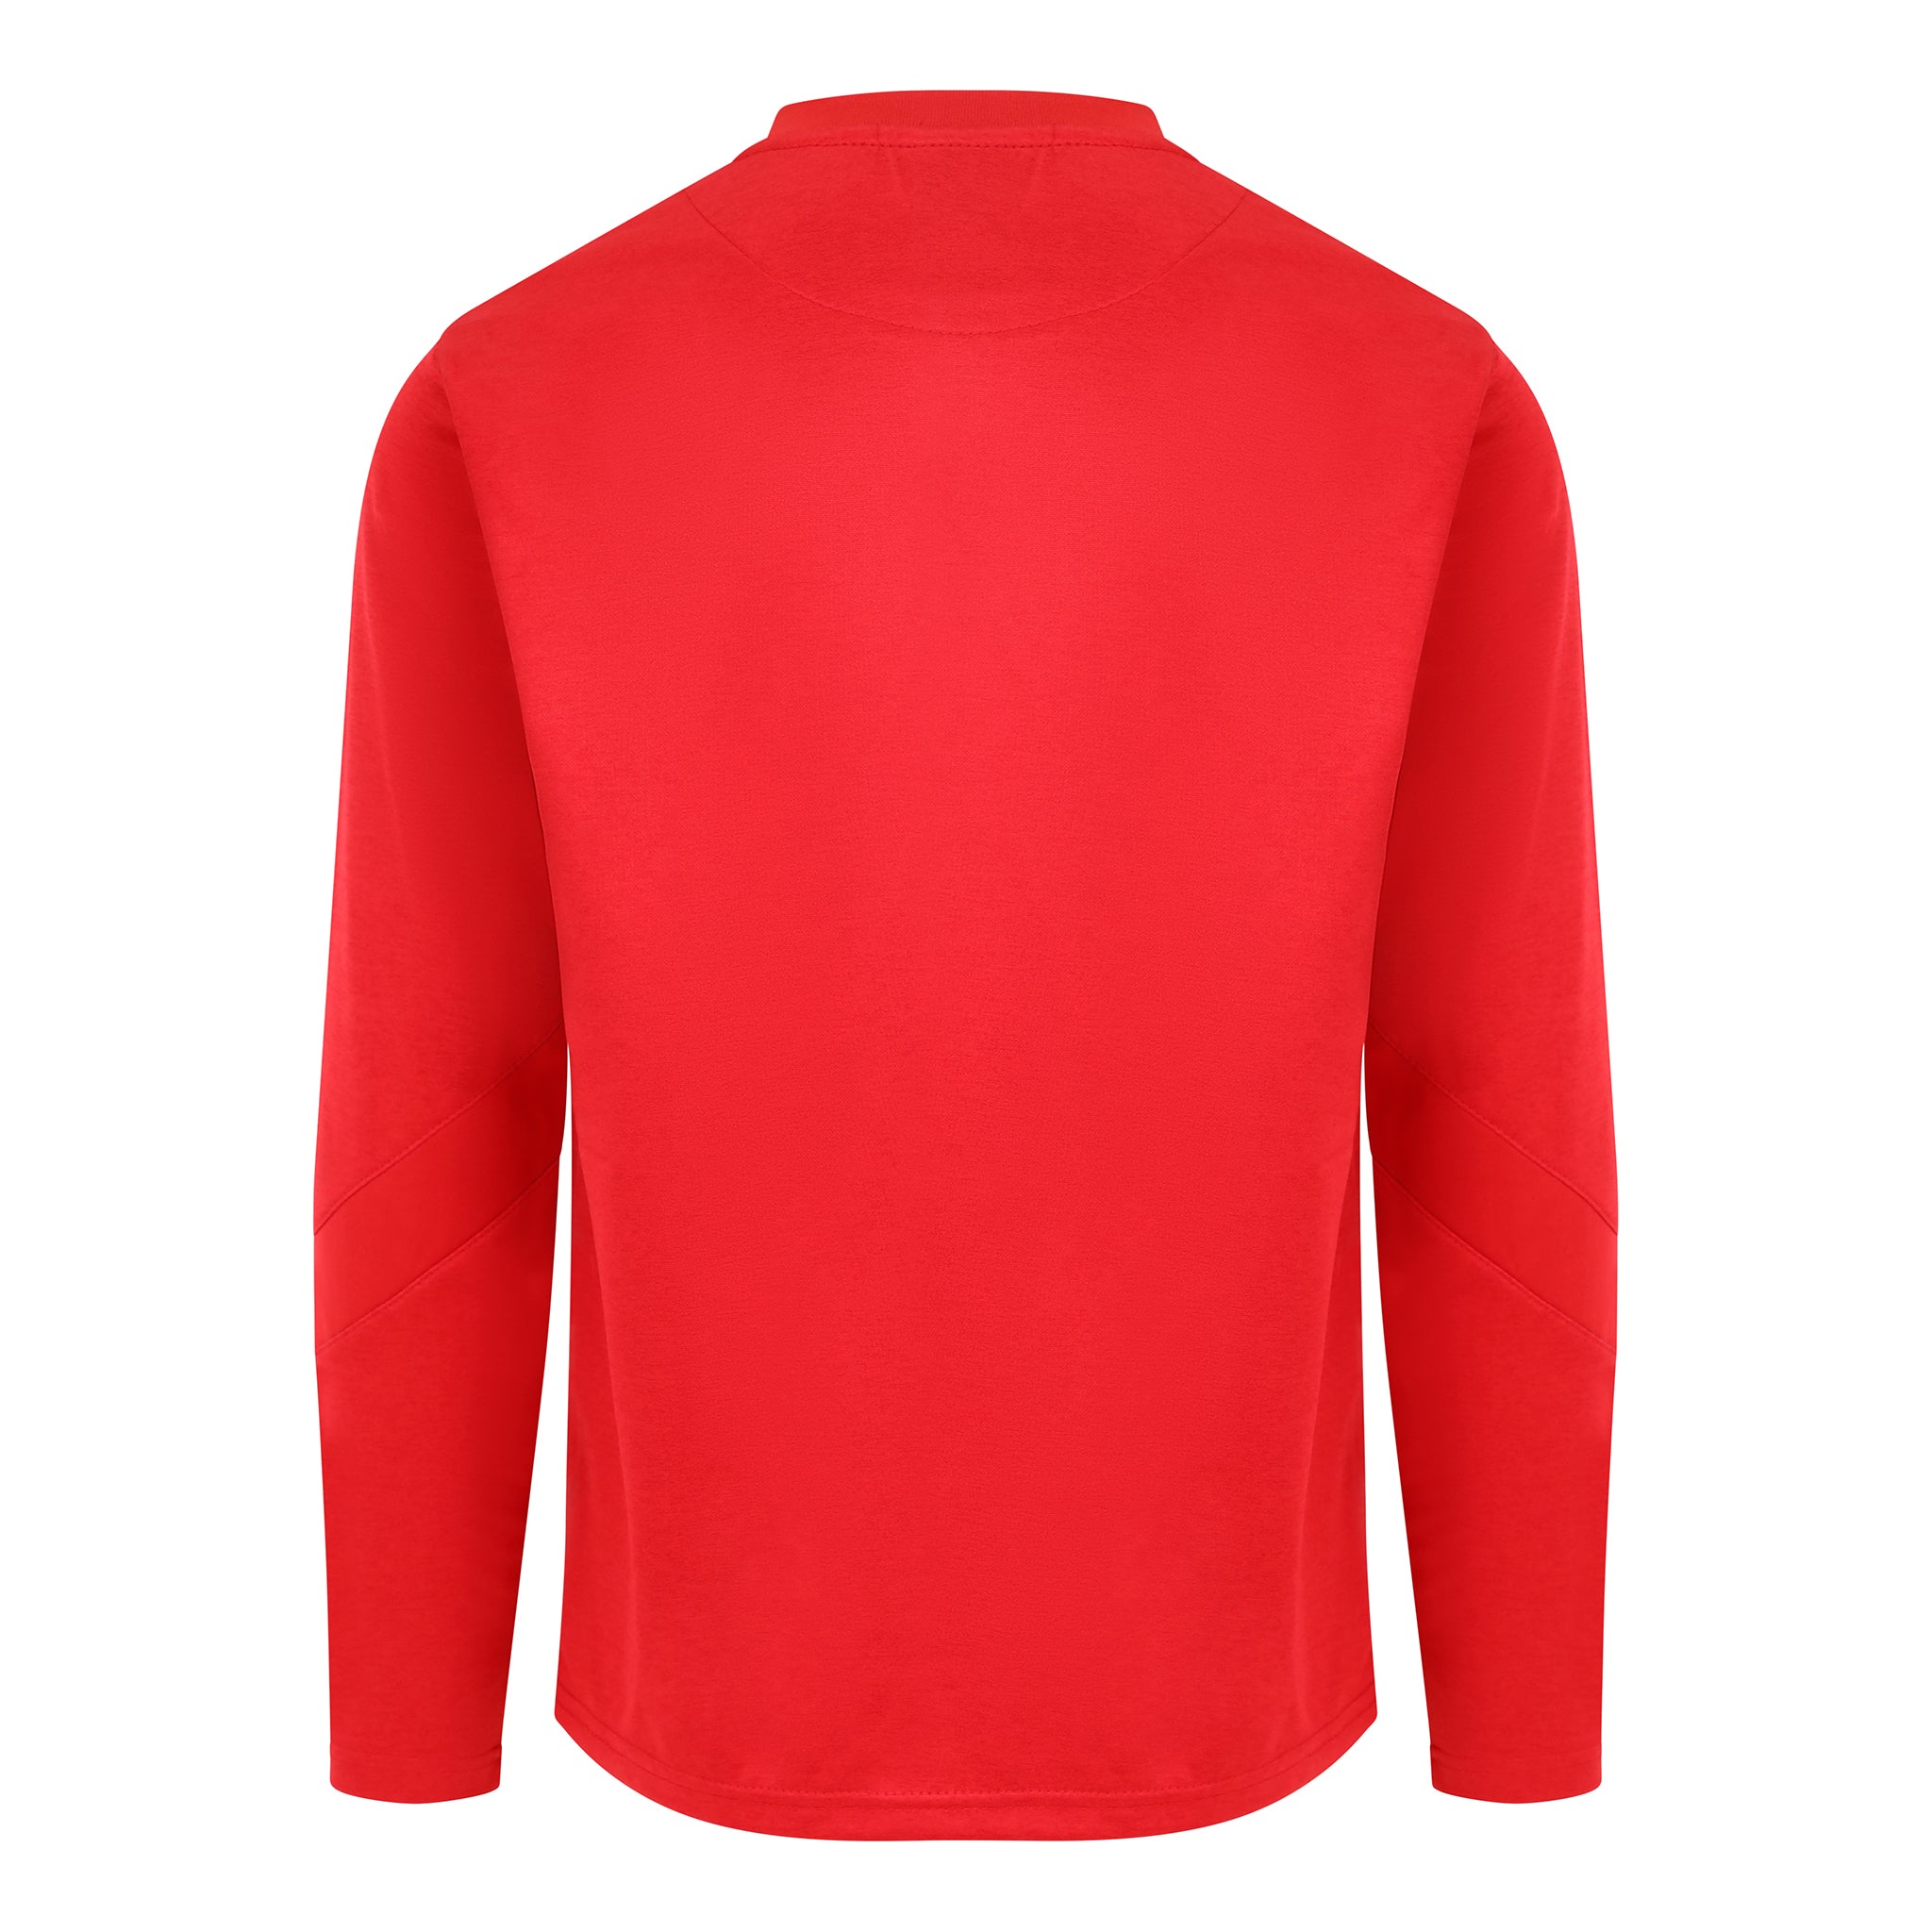 Mc Keever Core 22 Sweat Top - Adult - Red